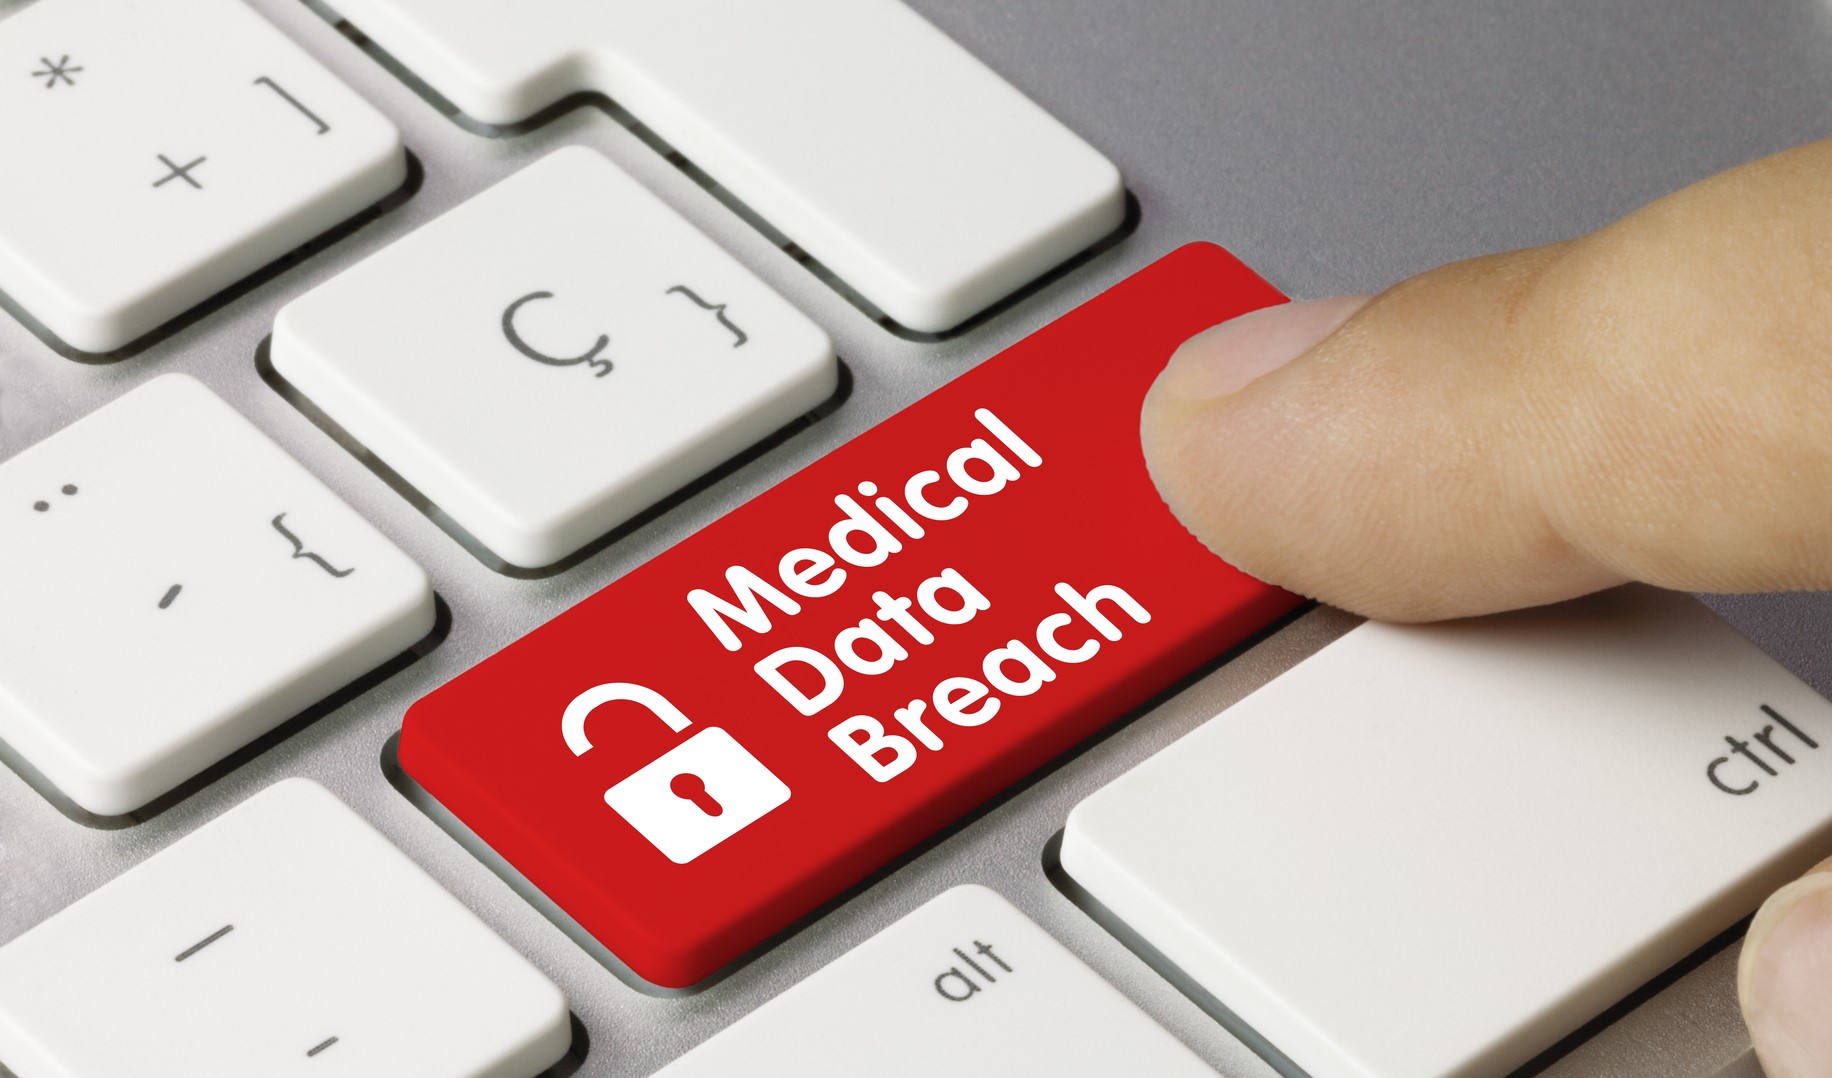 red key on a keyboard shows an unlocked lock and says "Medical Data Breach"